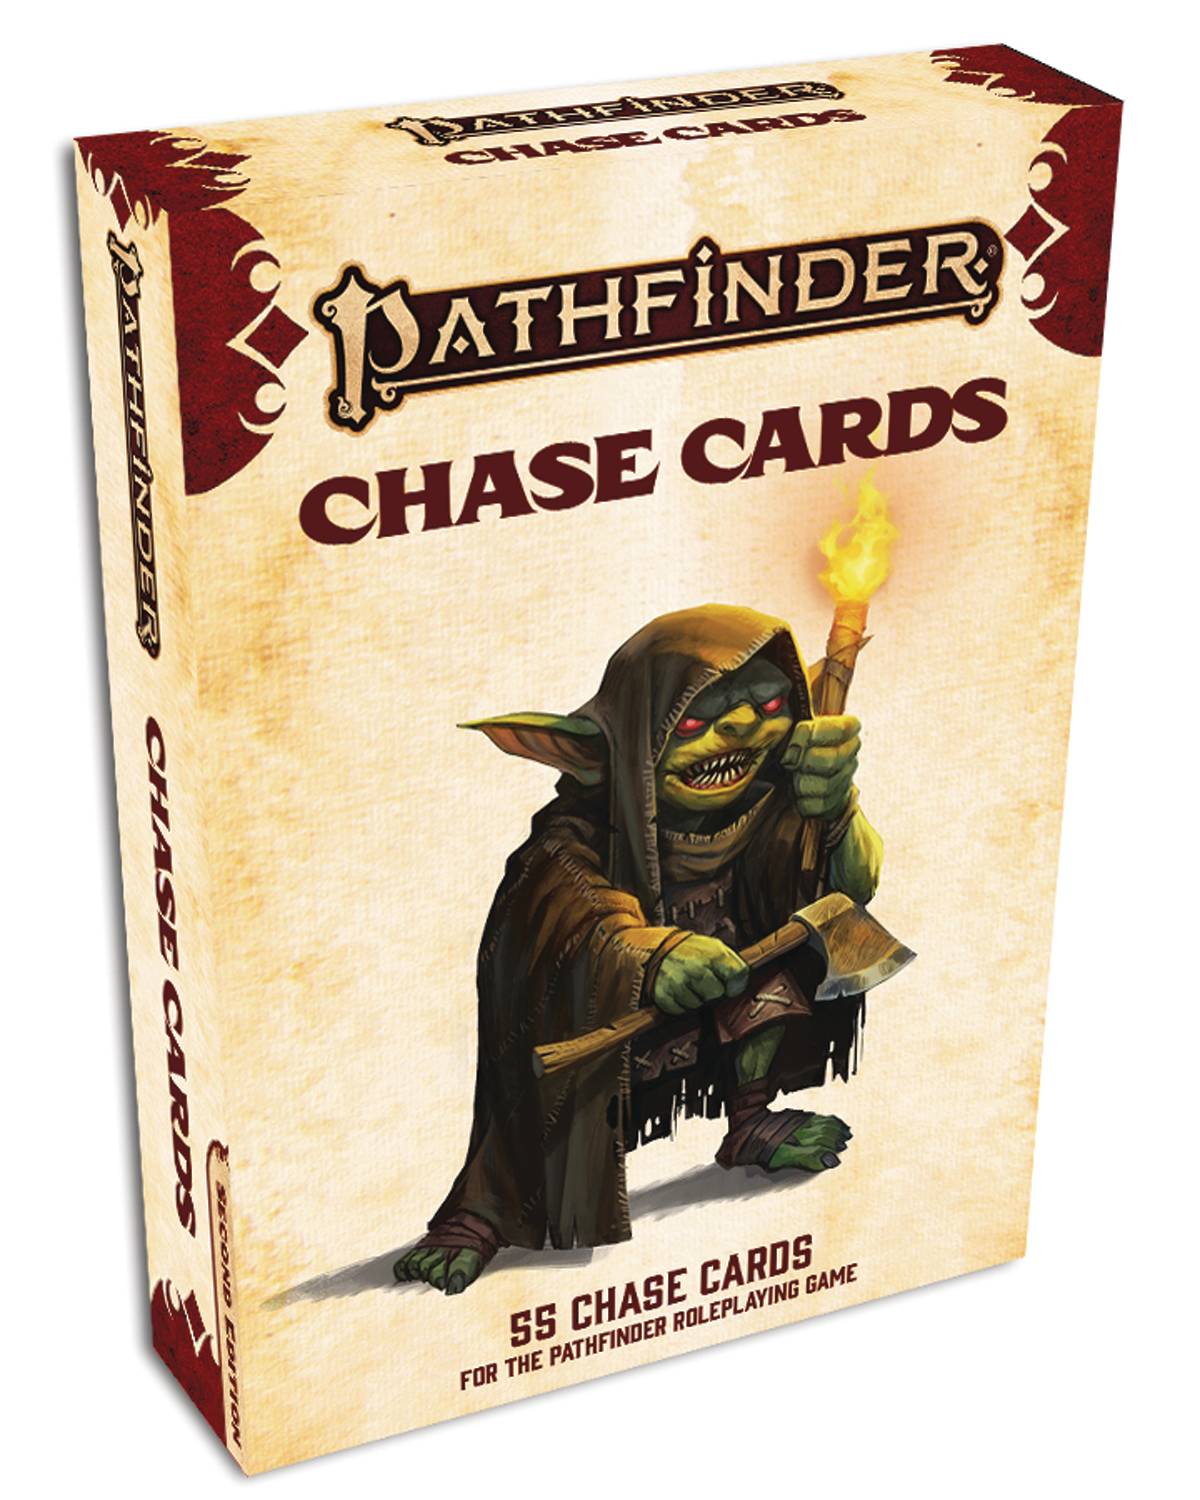 Pathfinder Chase Cards Deck (P2)